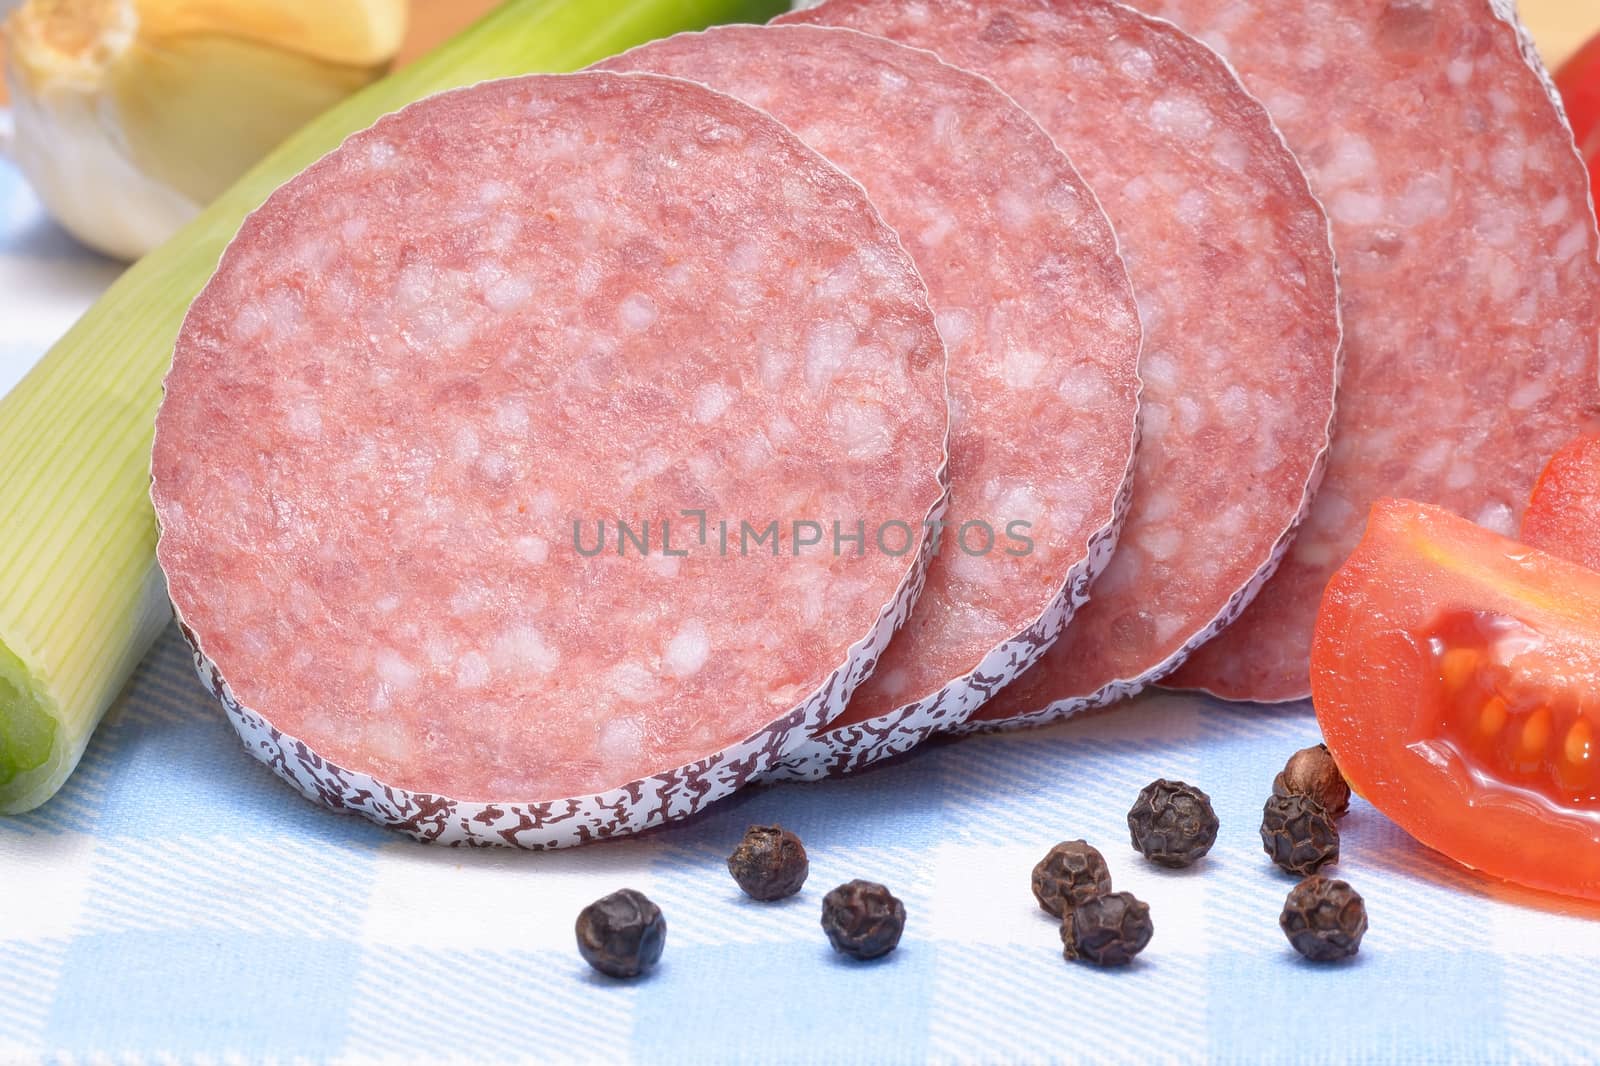 Salami sausage on wooden table by comet